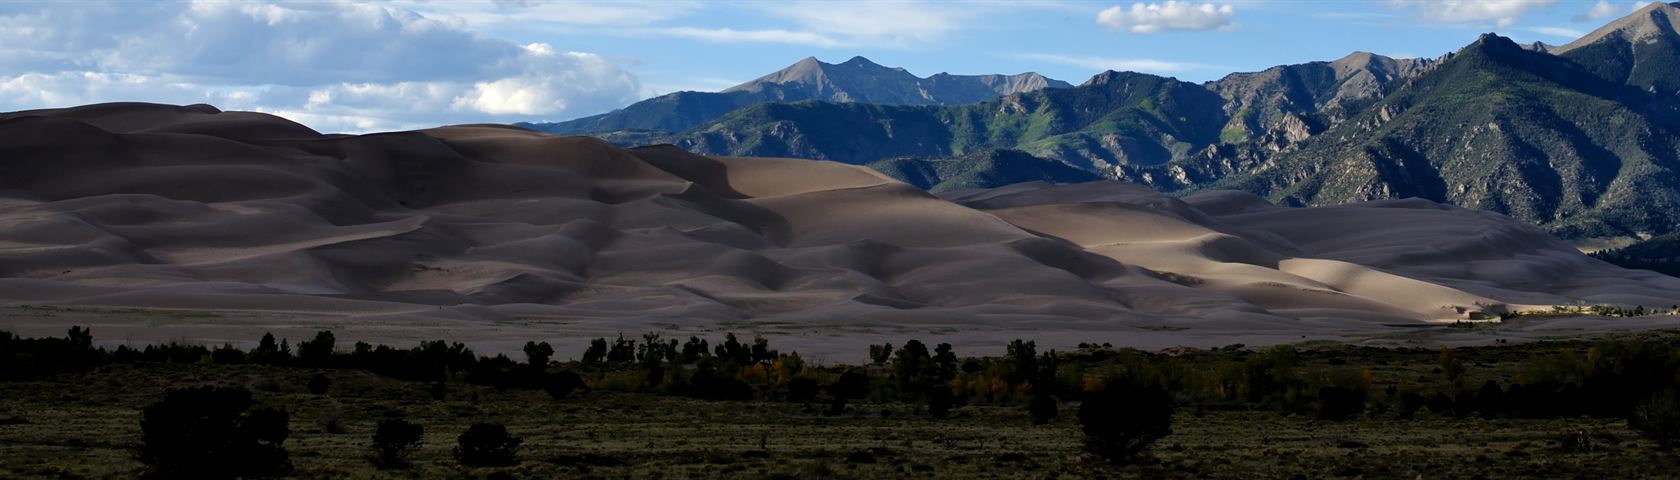 Sand Dunes and Mountains